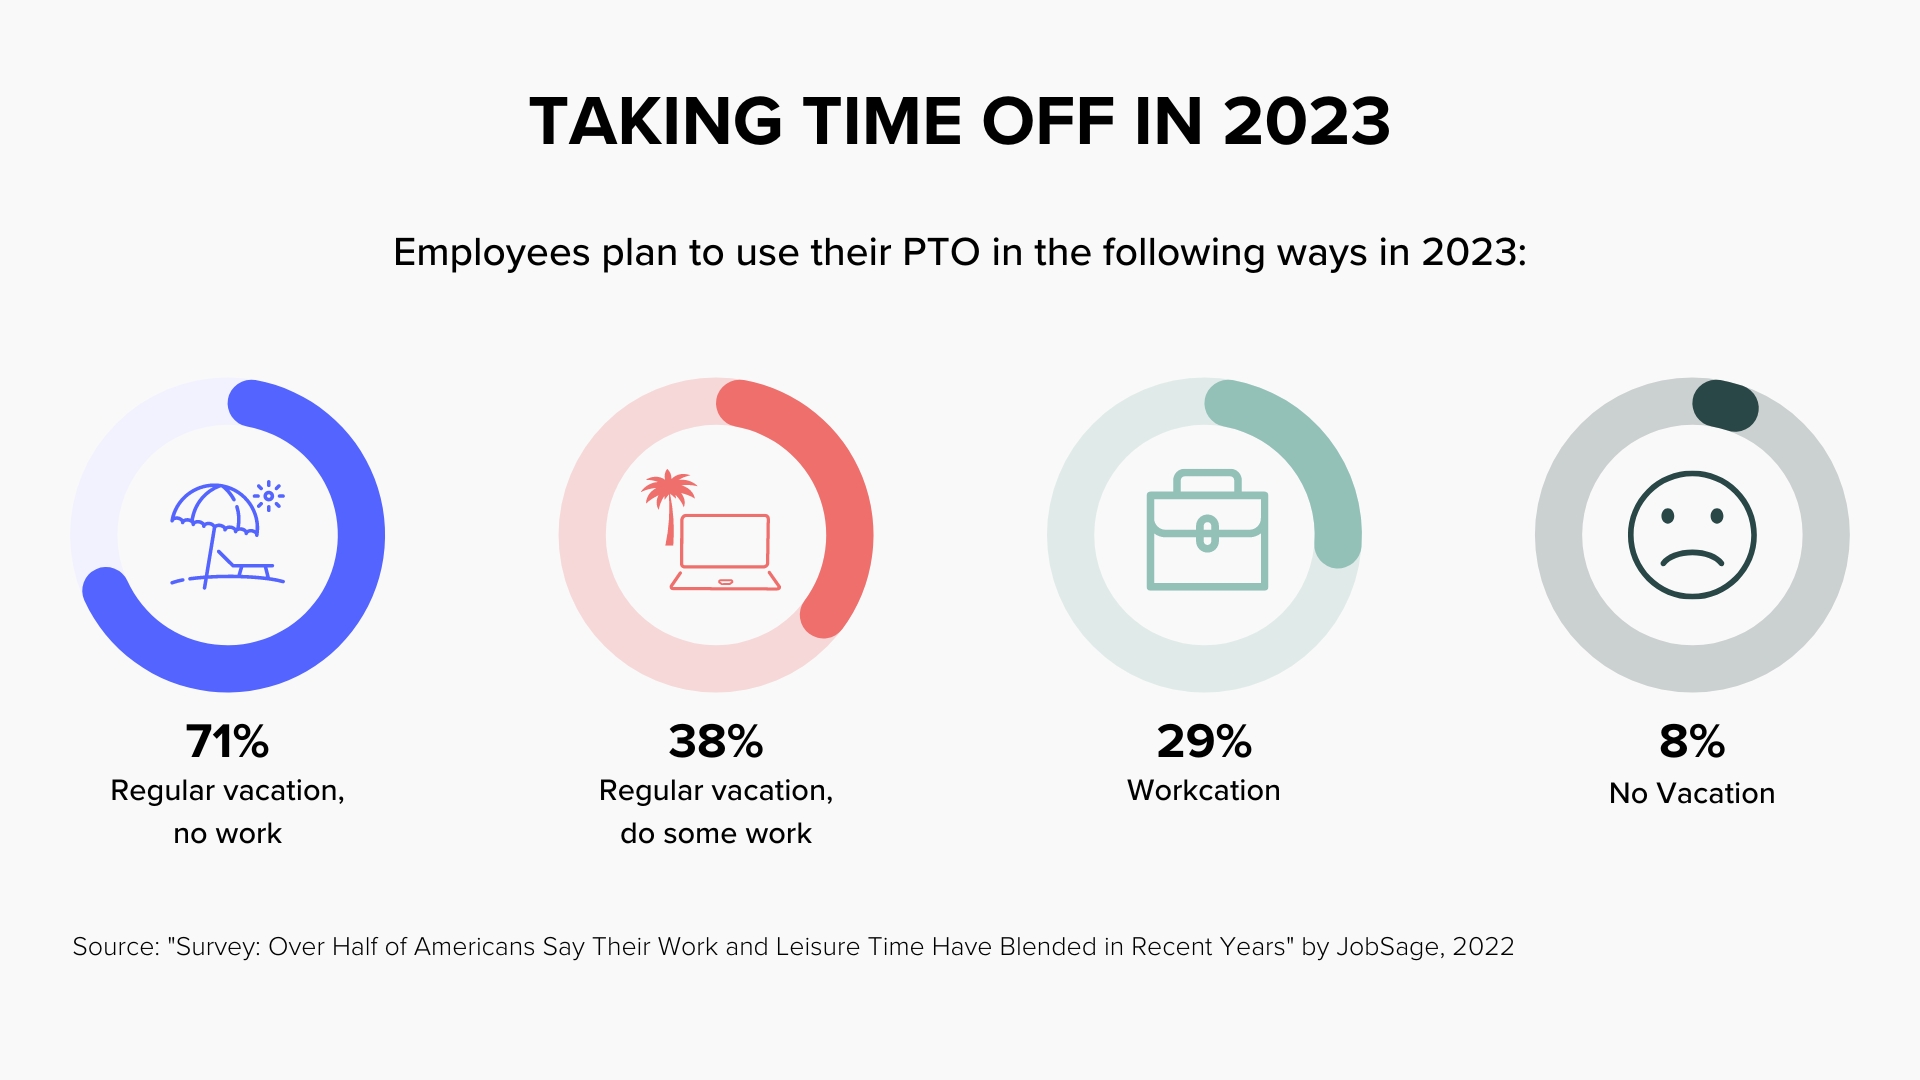 How employees plan to use PTO in 2023